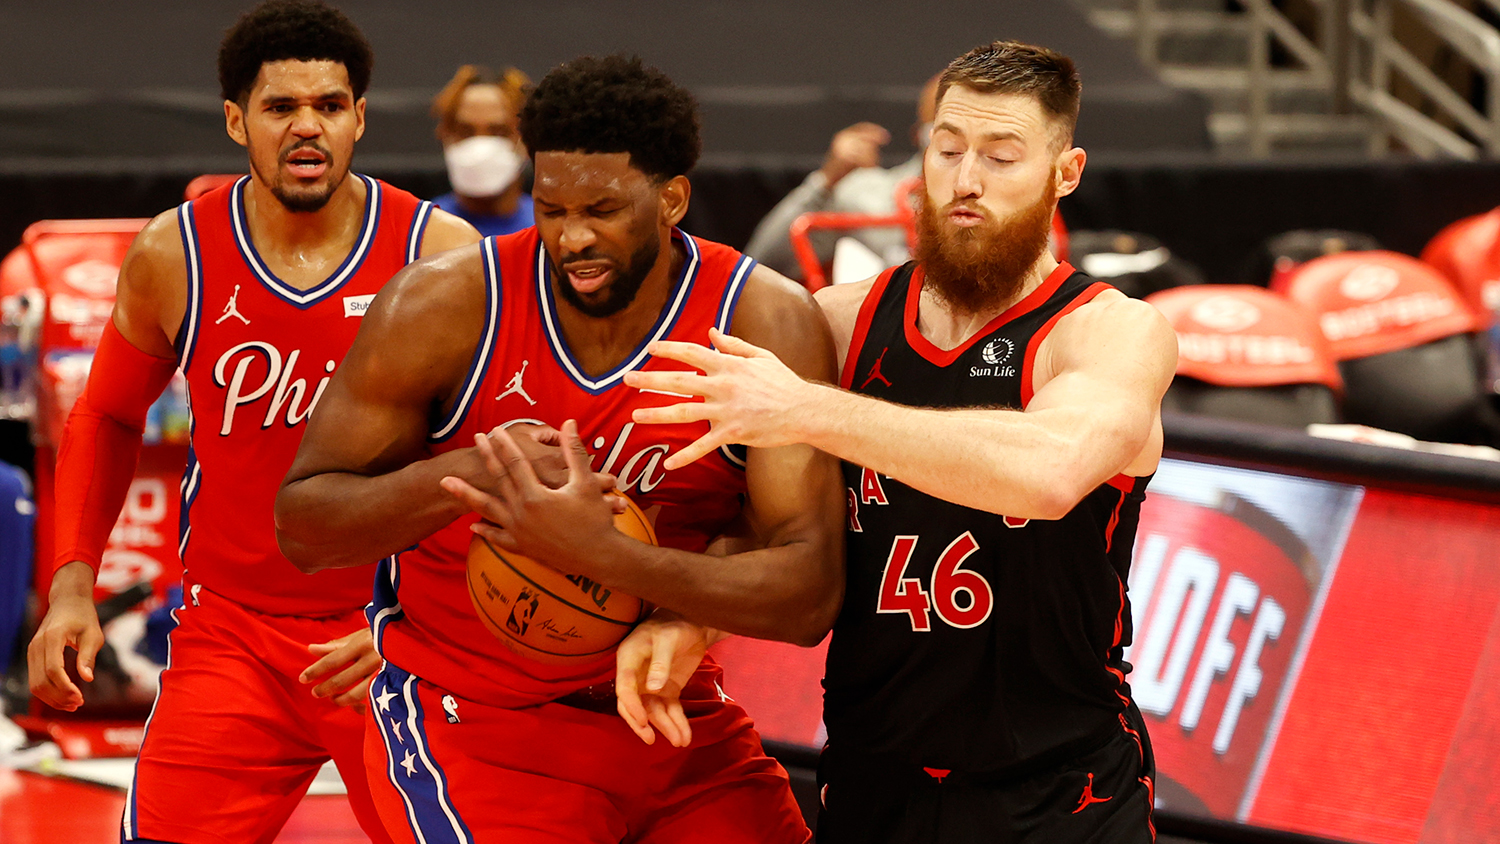 3 observations after the Sixers crash to Raptors, despite another high-scoring game from Ben Simmons